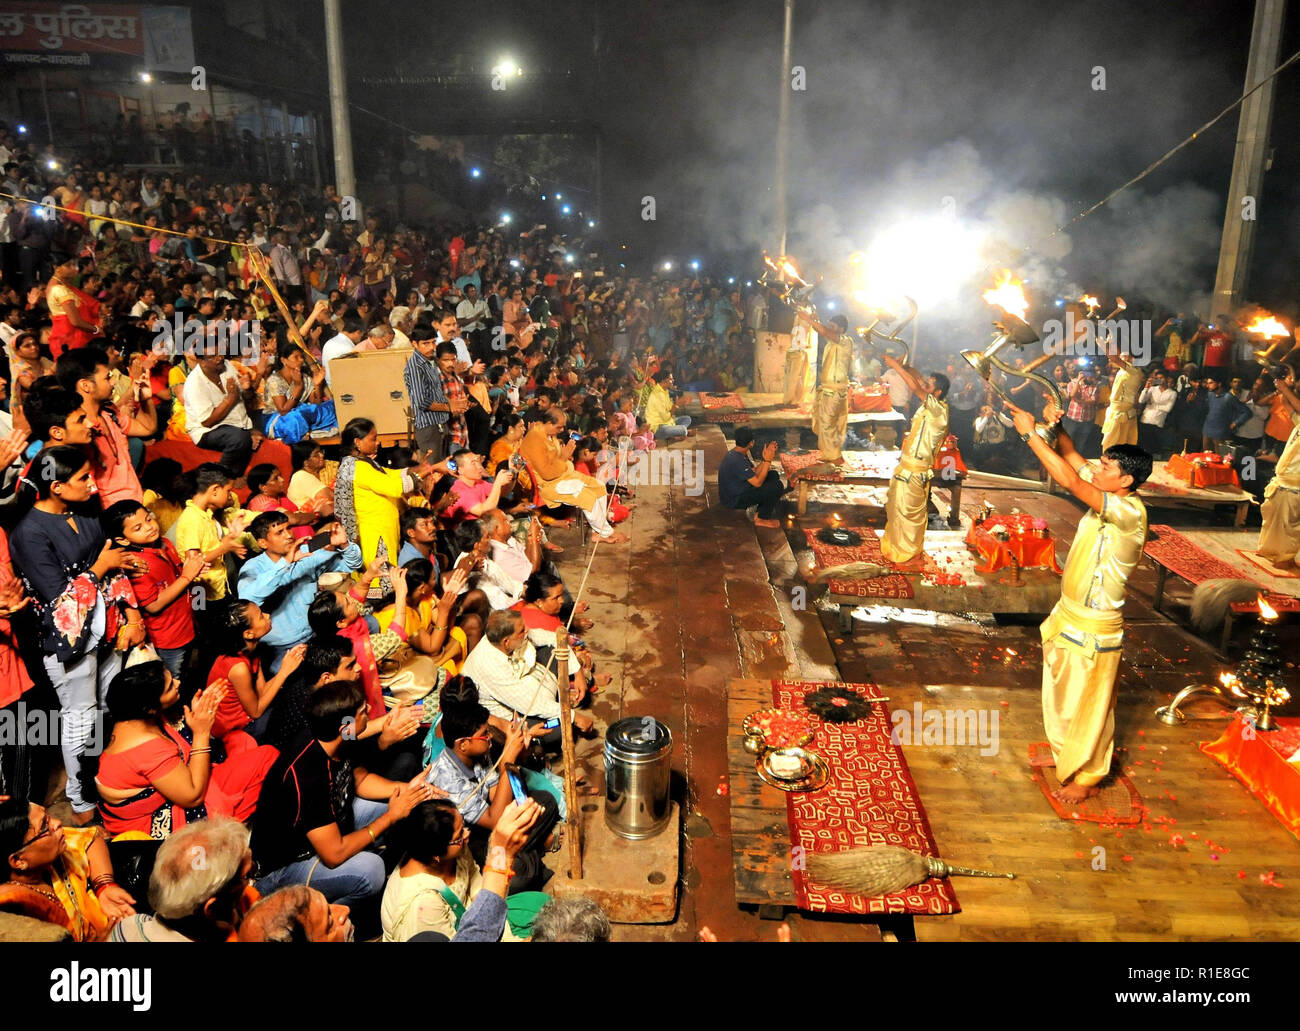 Varanasi, Hindus, Holy Ganges River. Brahmins or trainee priests reciting rituals at the nightly ceremony with flames in the form of candles. Stock Photo